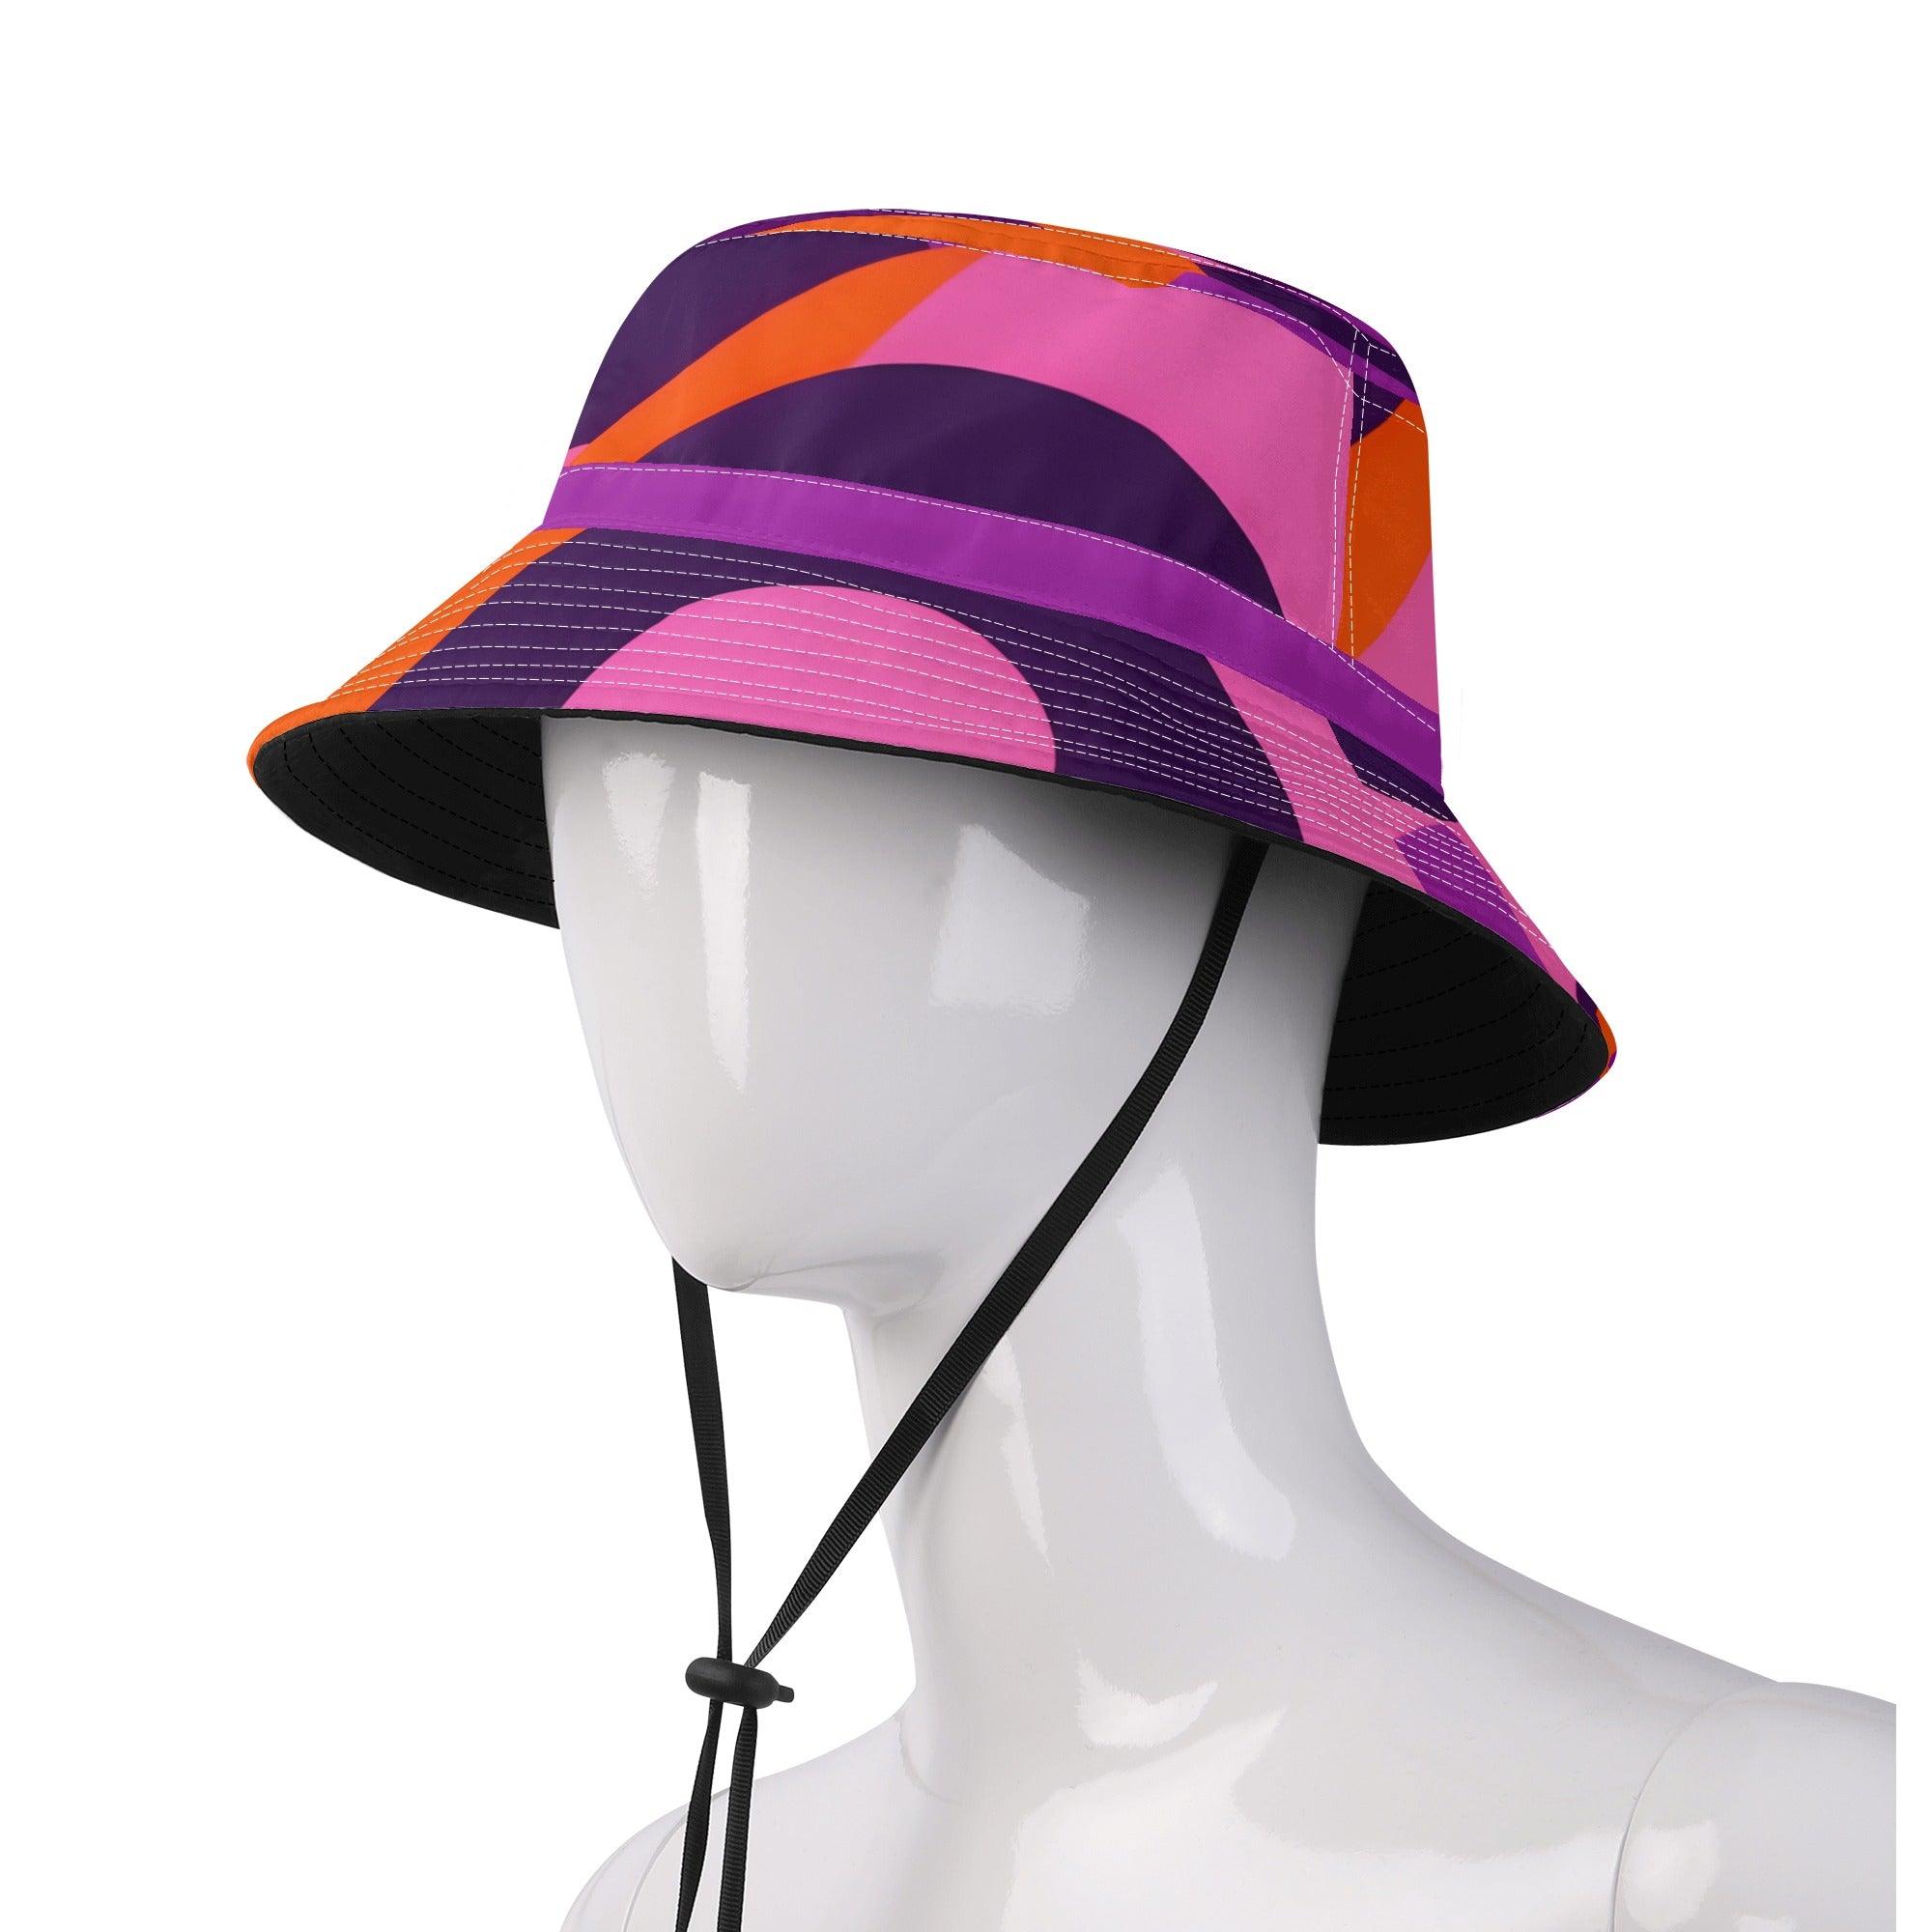  Adjustable Bucket Hat - Abstract Geometric Mod Retro Funky Artistic Bold Vibrant Multicolor Airline Series Tokyo 239 - Blissfully Brand